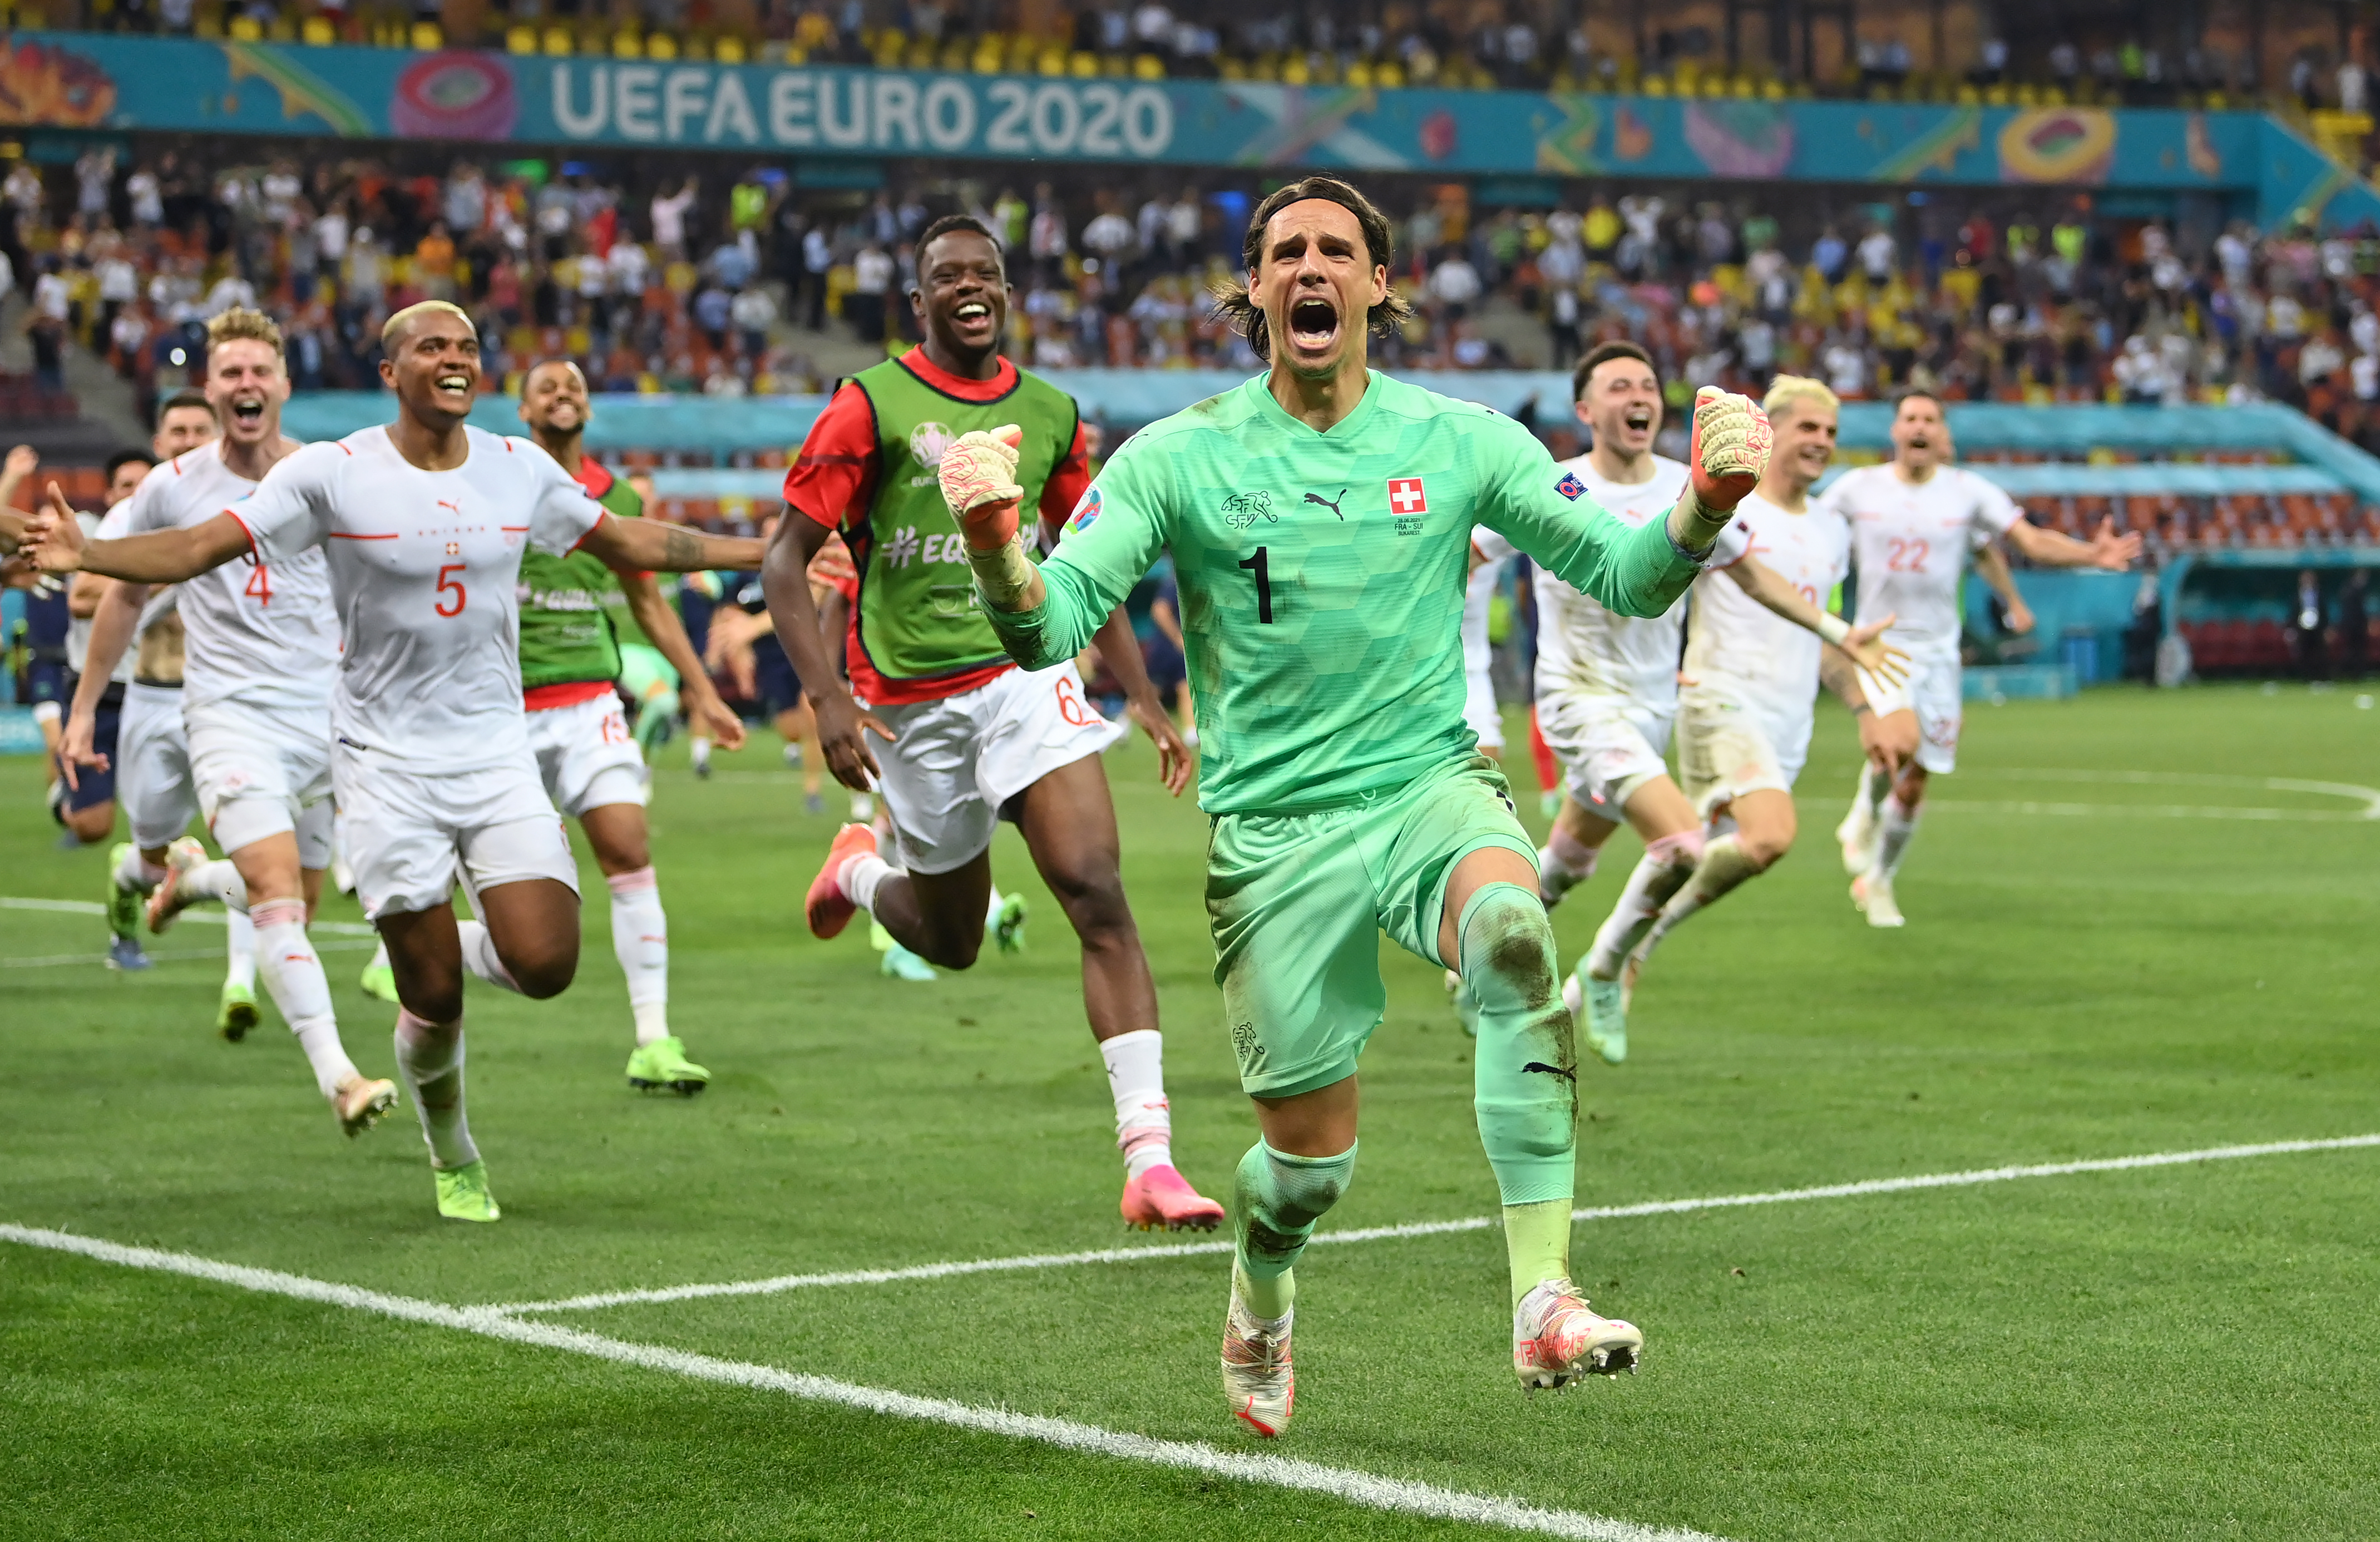 BUCHAREST, ROMANIA - JUNE 28: Yann Sommer of Switzerland celebrates after saving the decisive penalty taken by Kylian Mbappe of France to win the UEFA Euro 2020 Championship Round of 16 match between France and Switzerland at National Arena on June 28, 2021 in Bucharest, Romania. (Photo by Justin Setterfield/Getty Images)